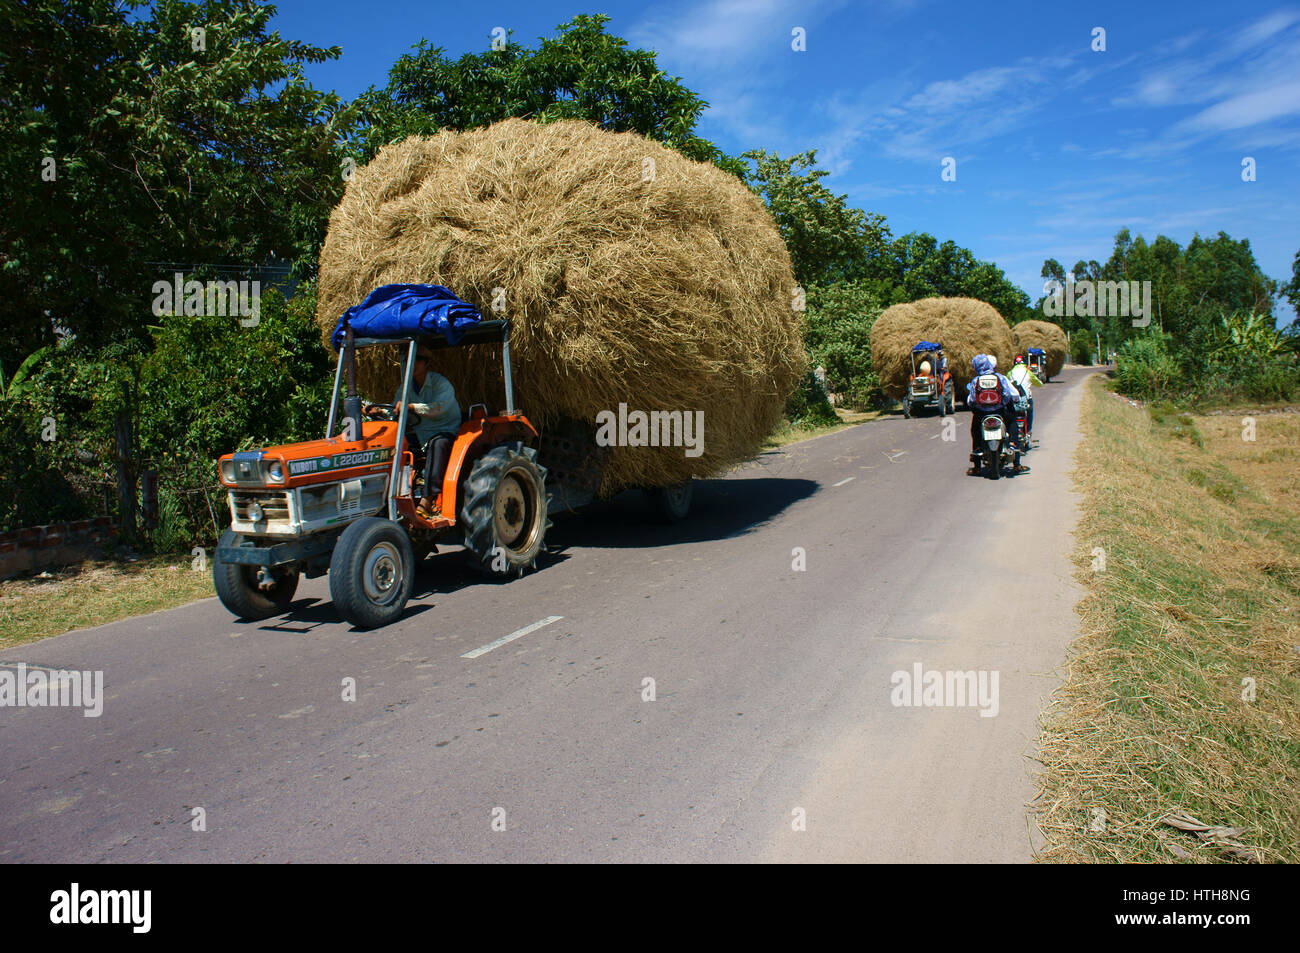 BINH DINH, VIET NAM- AUG 23, 2015: Asian farmer transport rice straw by farm tractor on country road, a danger traffic from transportation Stock Photo